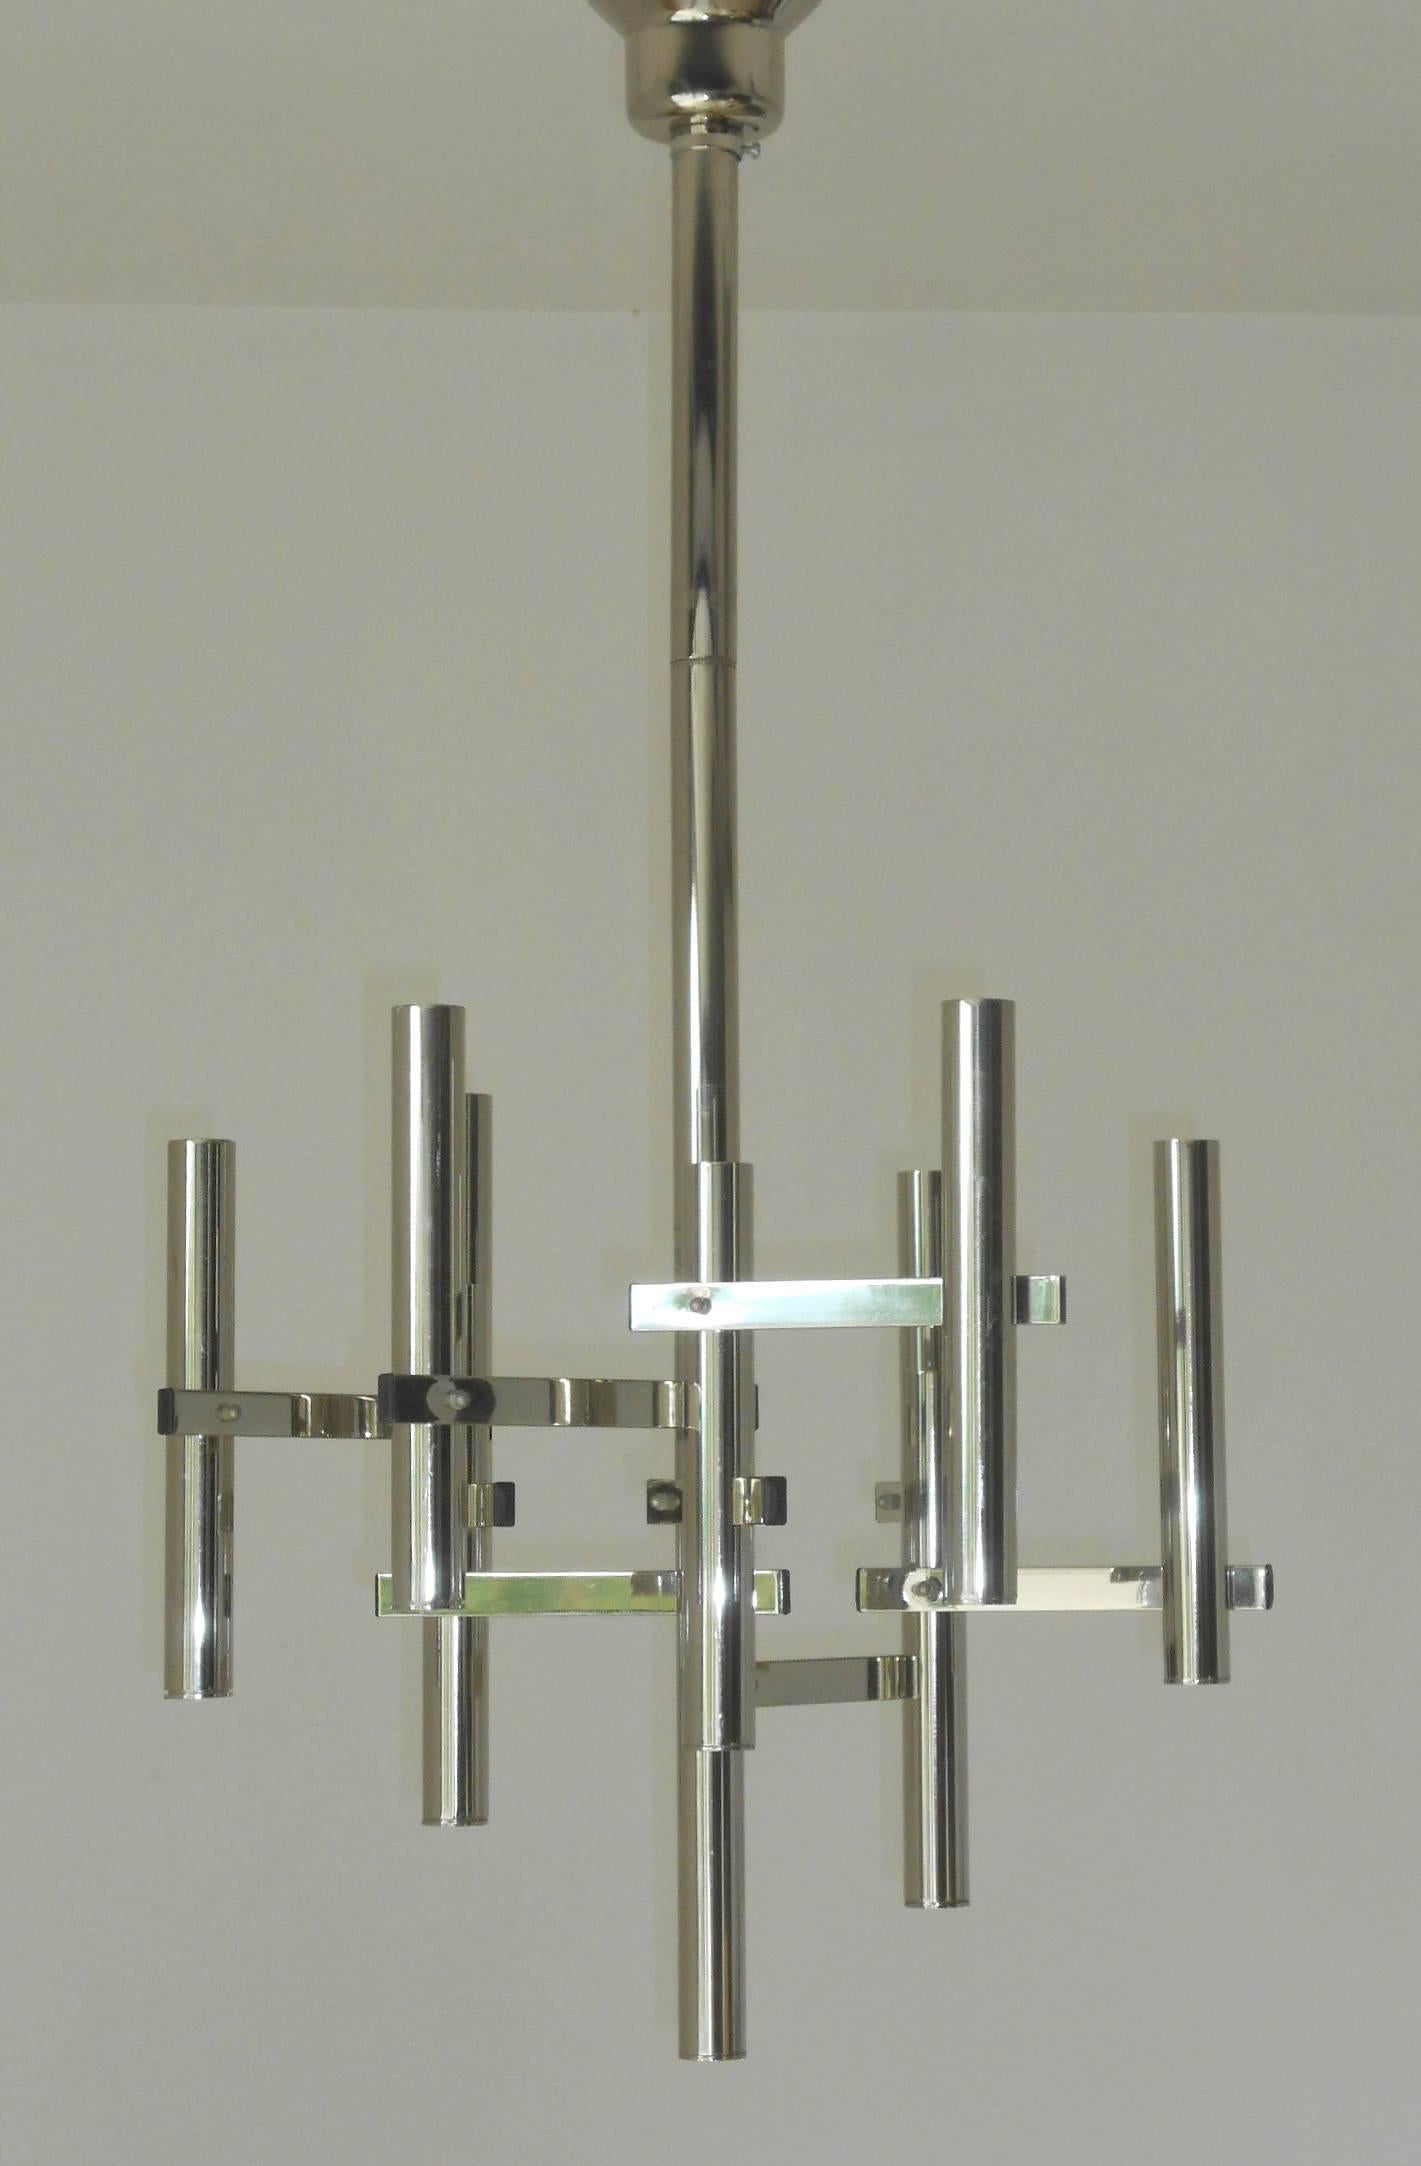 Original vintage pendant with nine tubular chrome arms and frame / Designed by Sciolari circa 1960’s / Made in Italy 
9 lights / E12 type / max 40W each
Height: 37 inches including rod and canopy / Diameter: 20 inches
1 in stock in Palm Springs